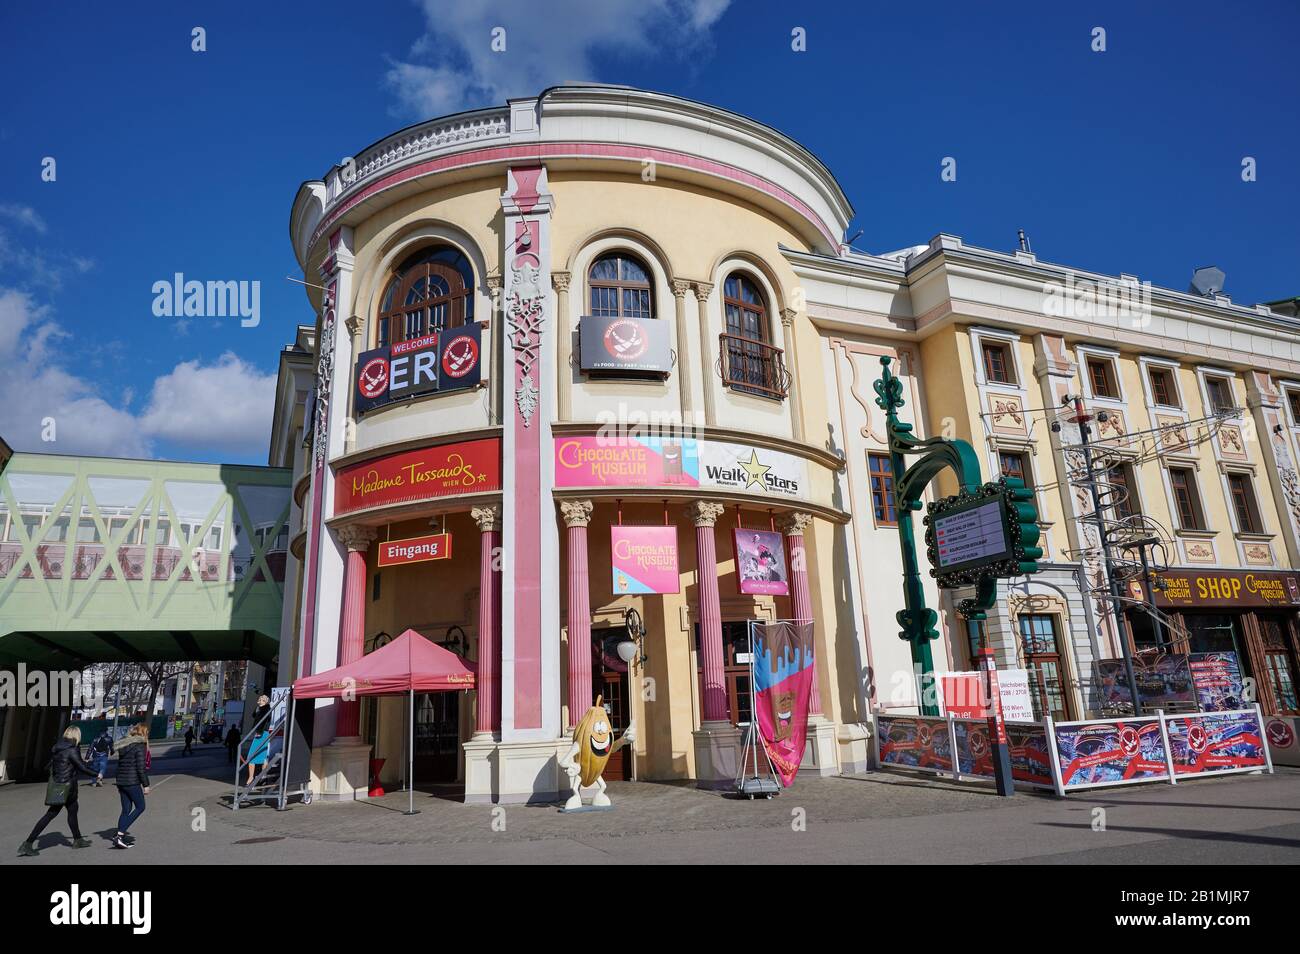 Vienna, Austria - February 20, 2020: Madame Tussaud's museum in the Prater park, Vienna. The amusement park stands in one corner of the Wiener Prater and includes the famous Wiener Riesenrad. Stock Photo